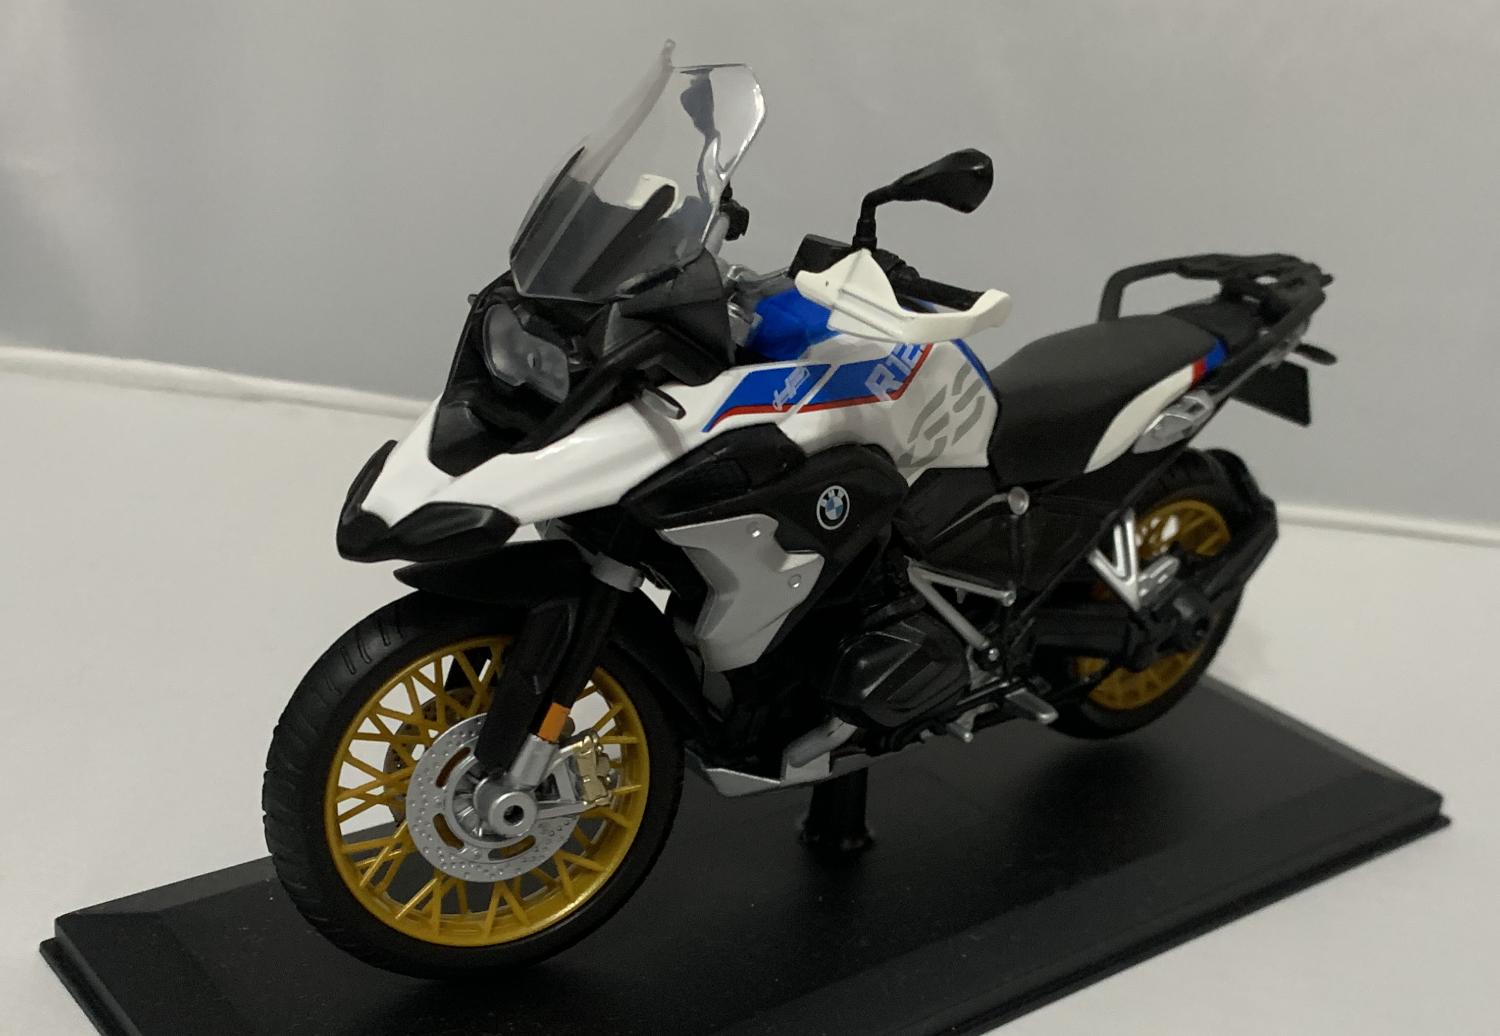 BMW R1250 GS in white & blue 1:12 scale motorbike model from Maisto